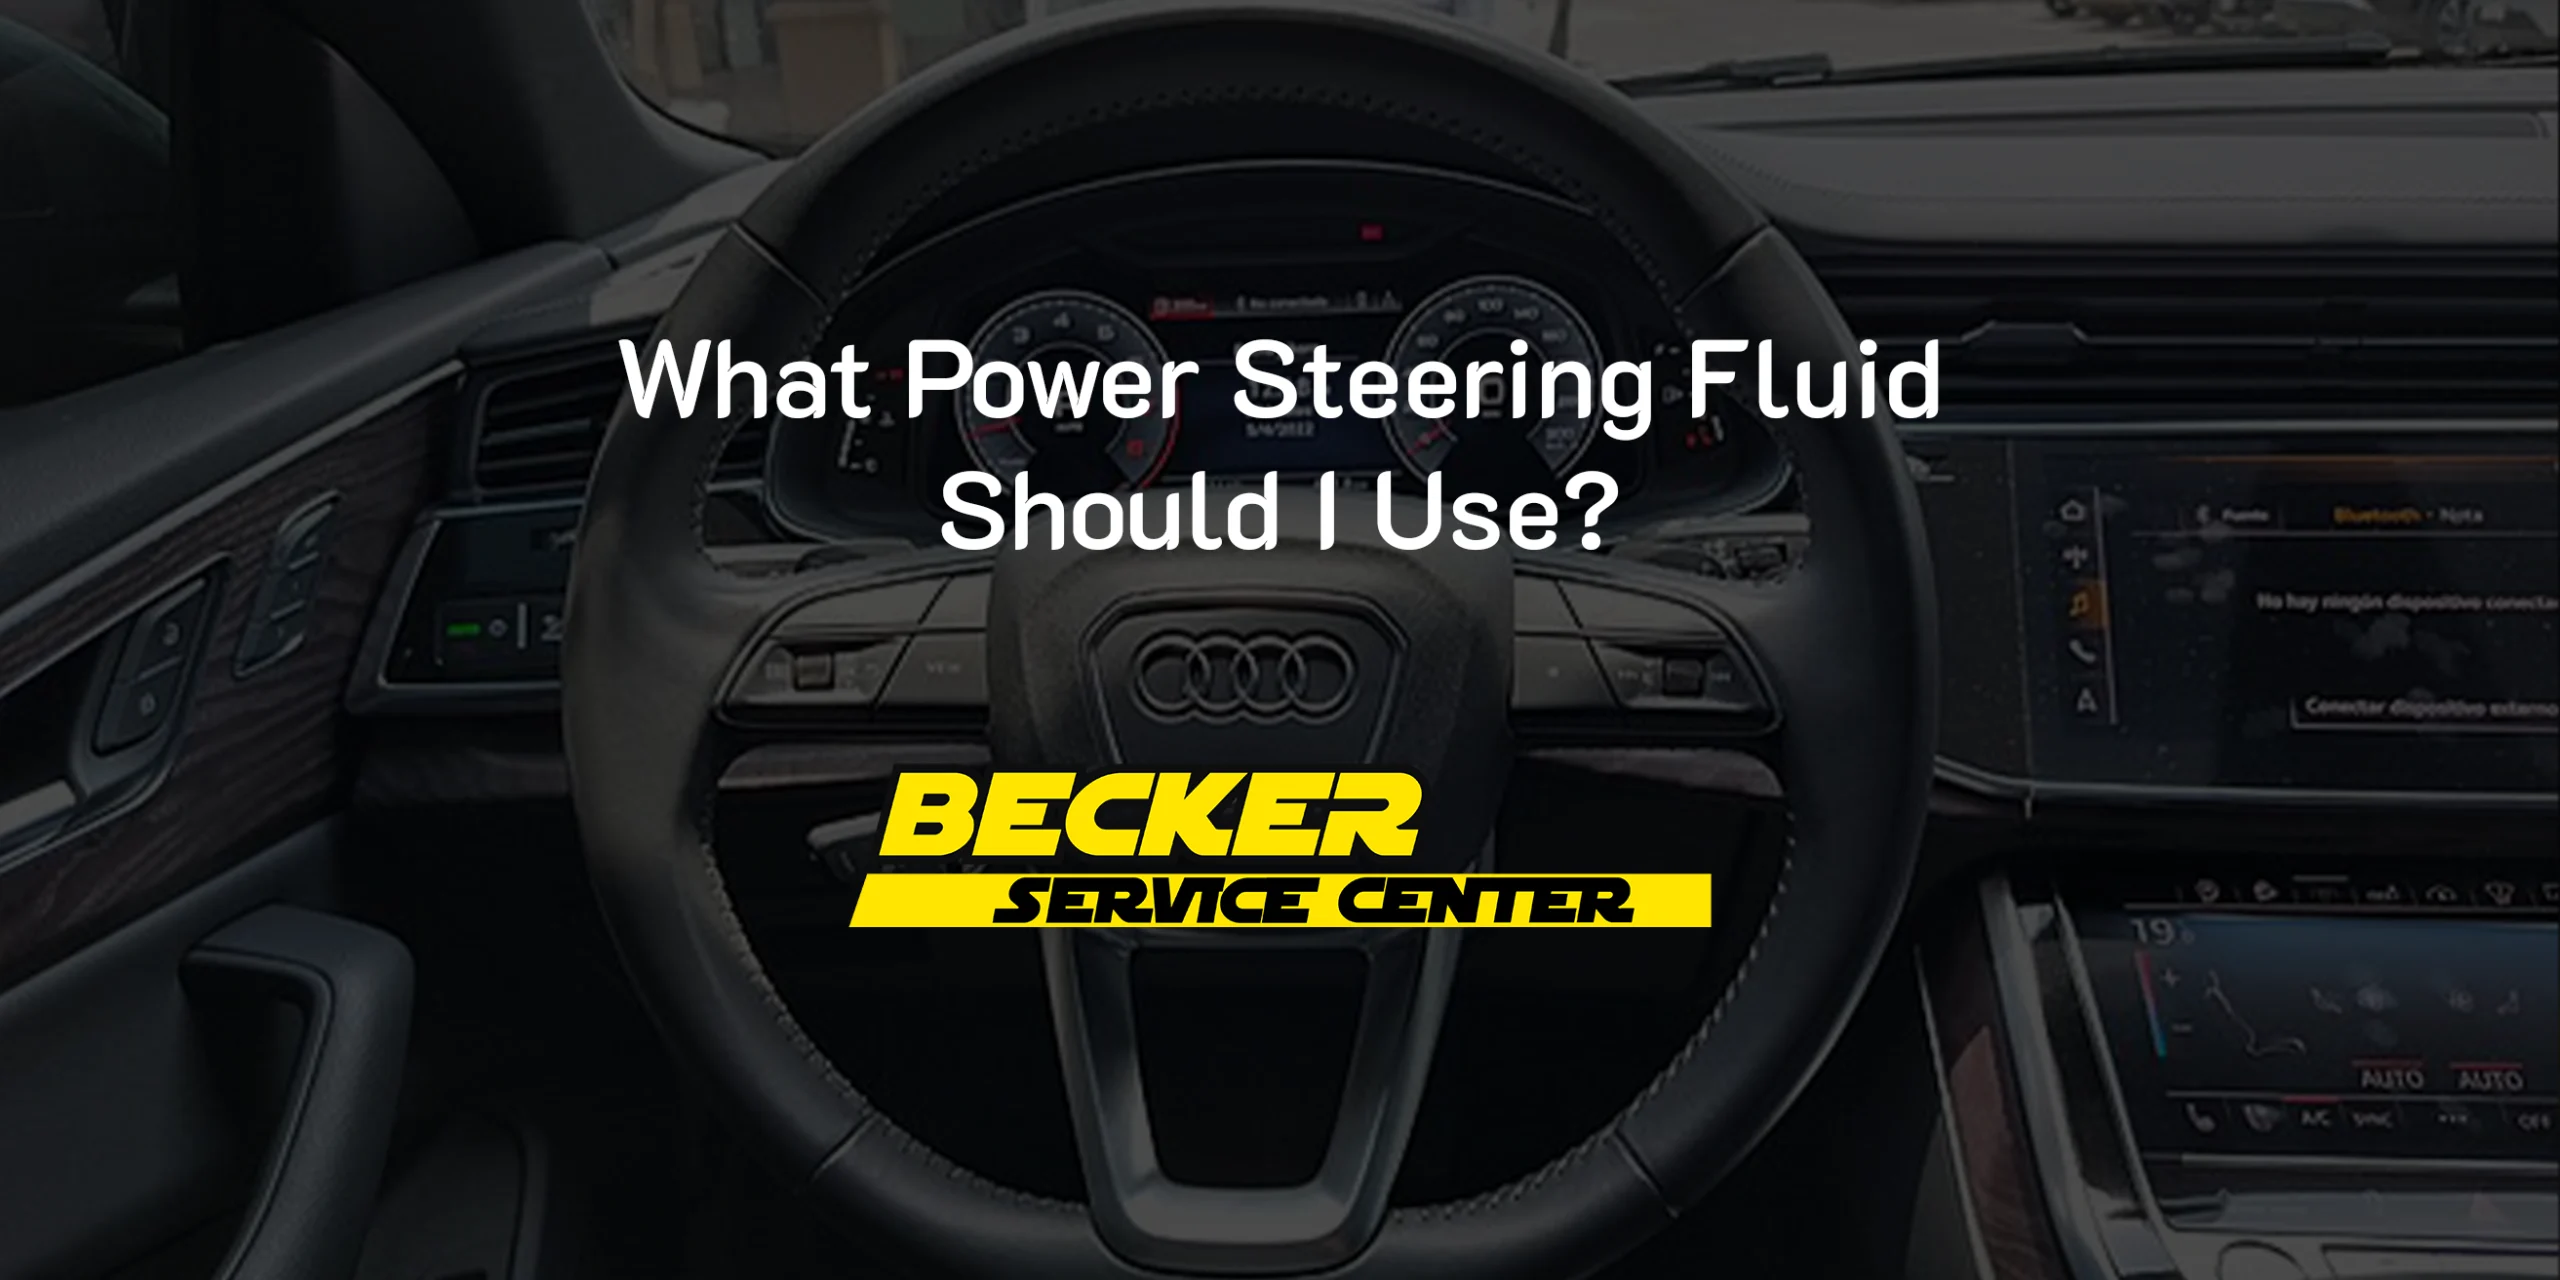 What Power Steering Fluid Should I Use?